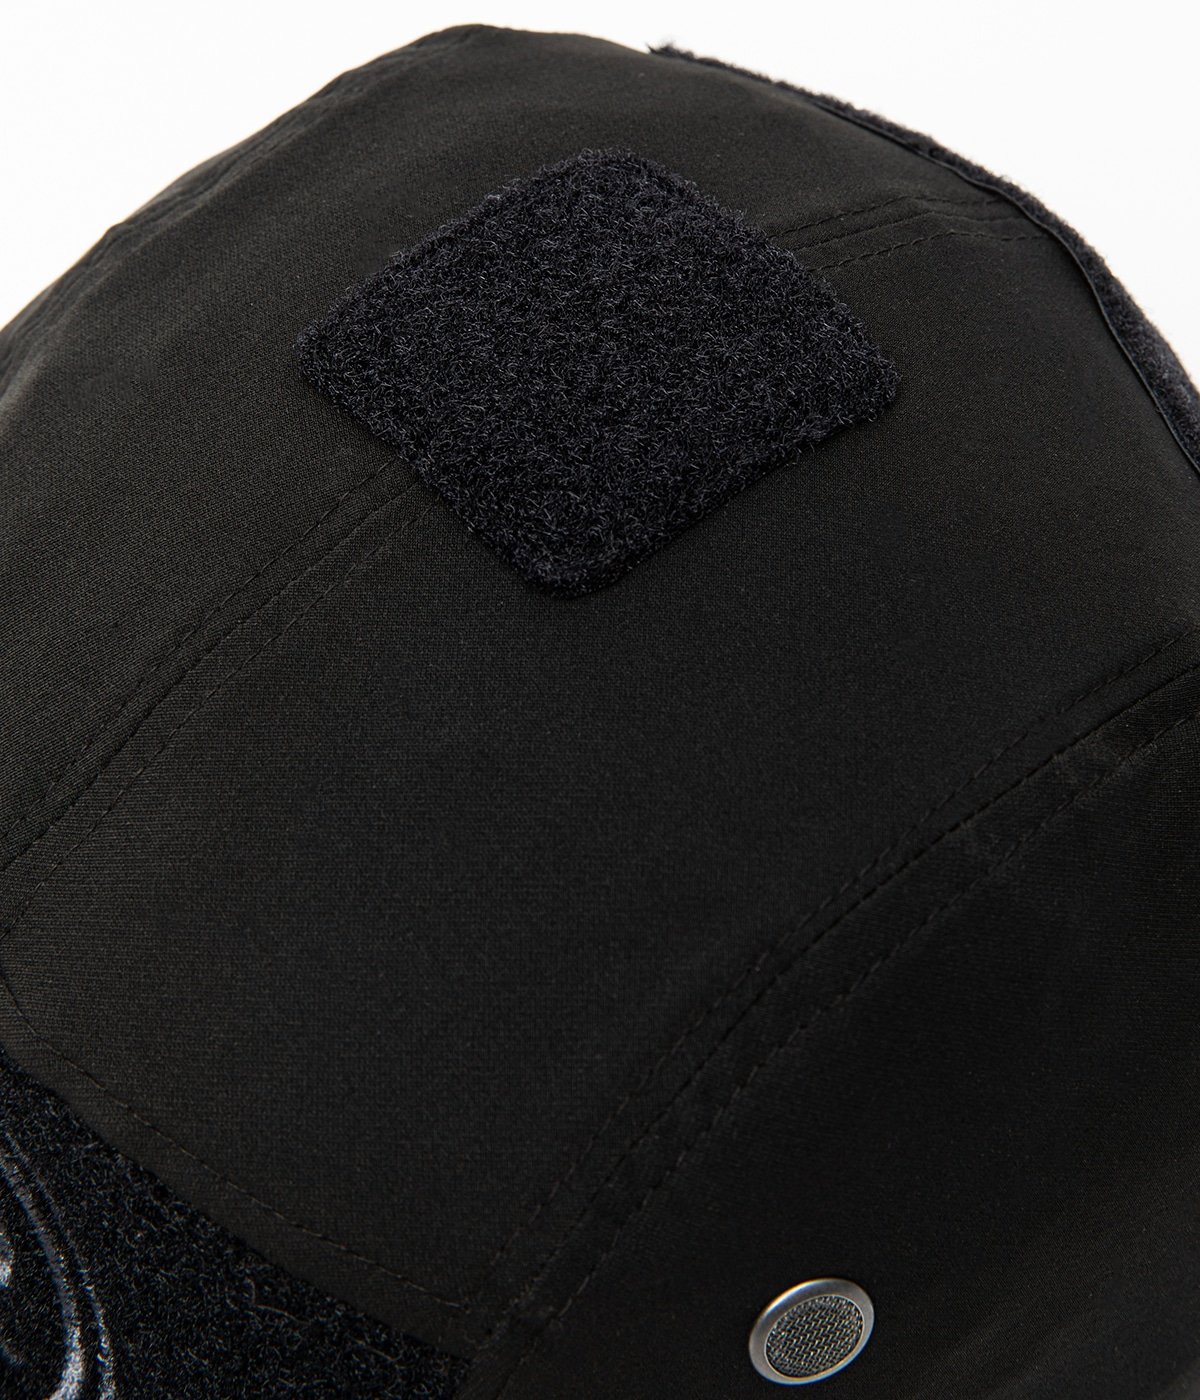 ３XDRY TACTICAL CAP | MOUT RECON TAILOR(マウトリーコンテーラー